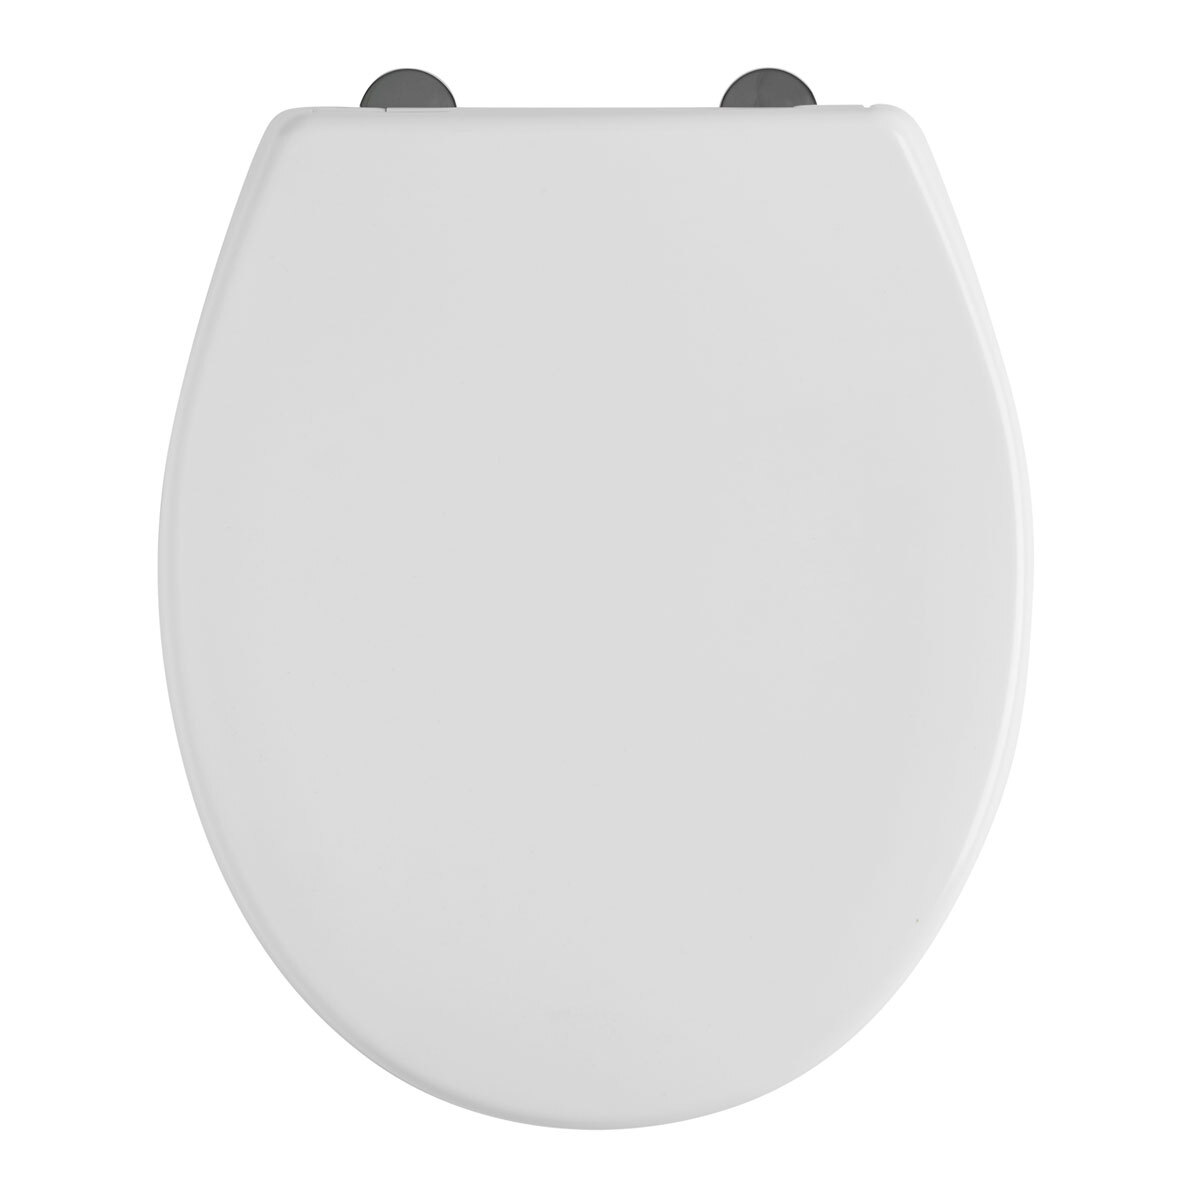 Top view of toilet seat on white background